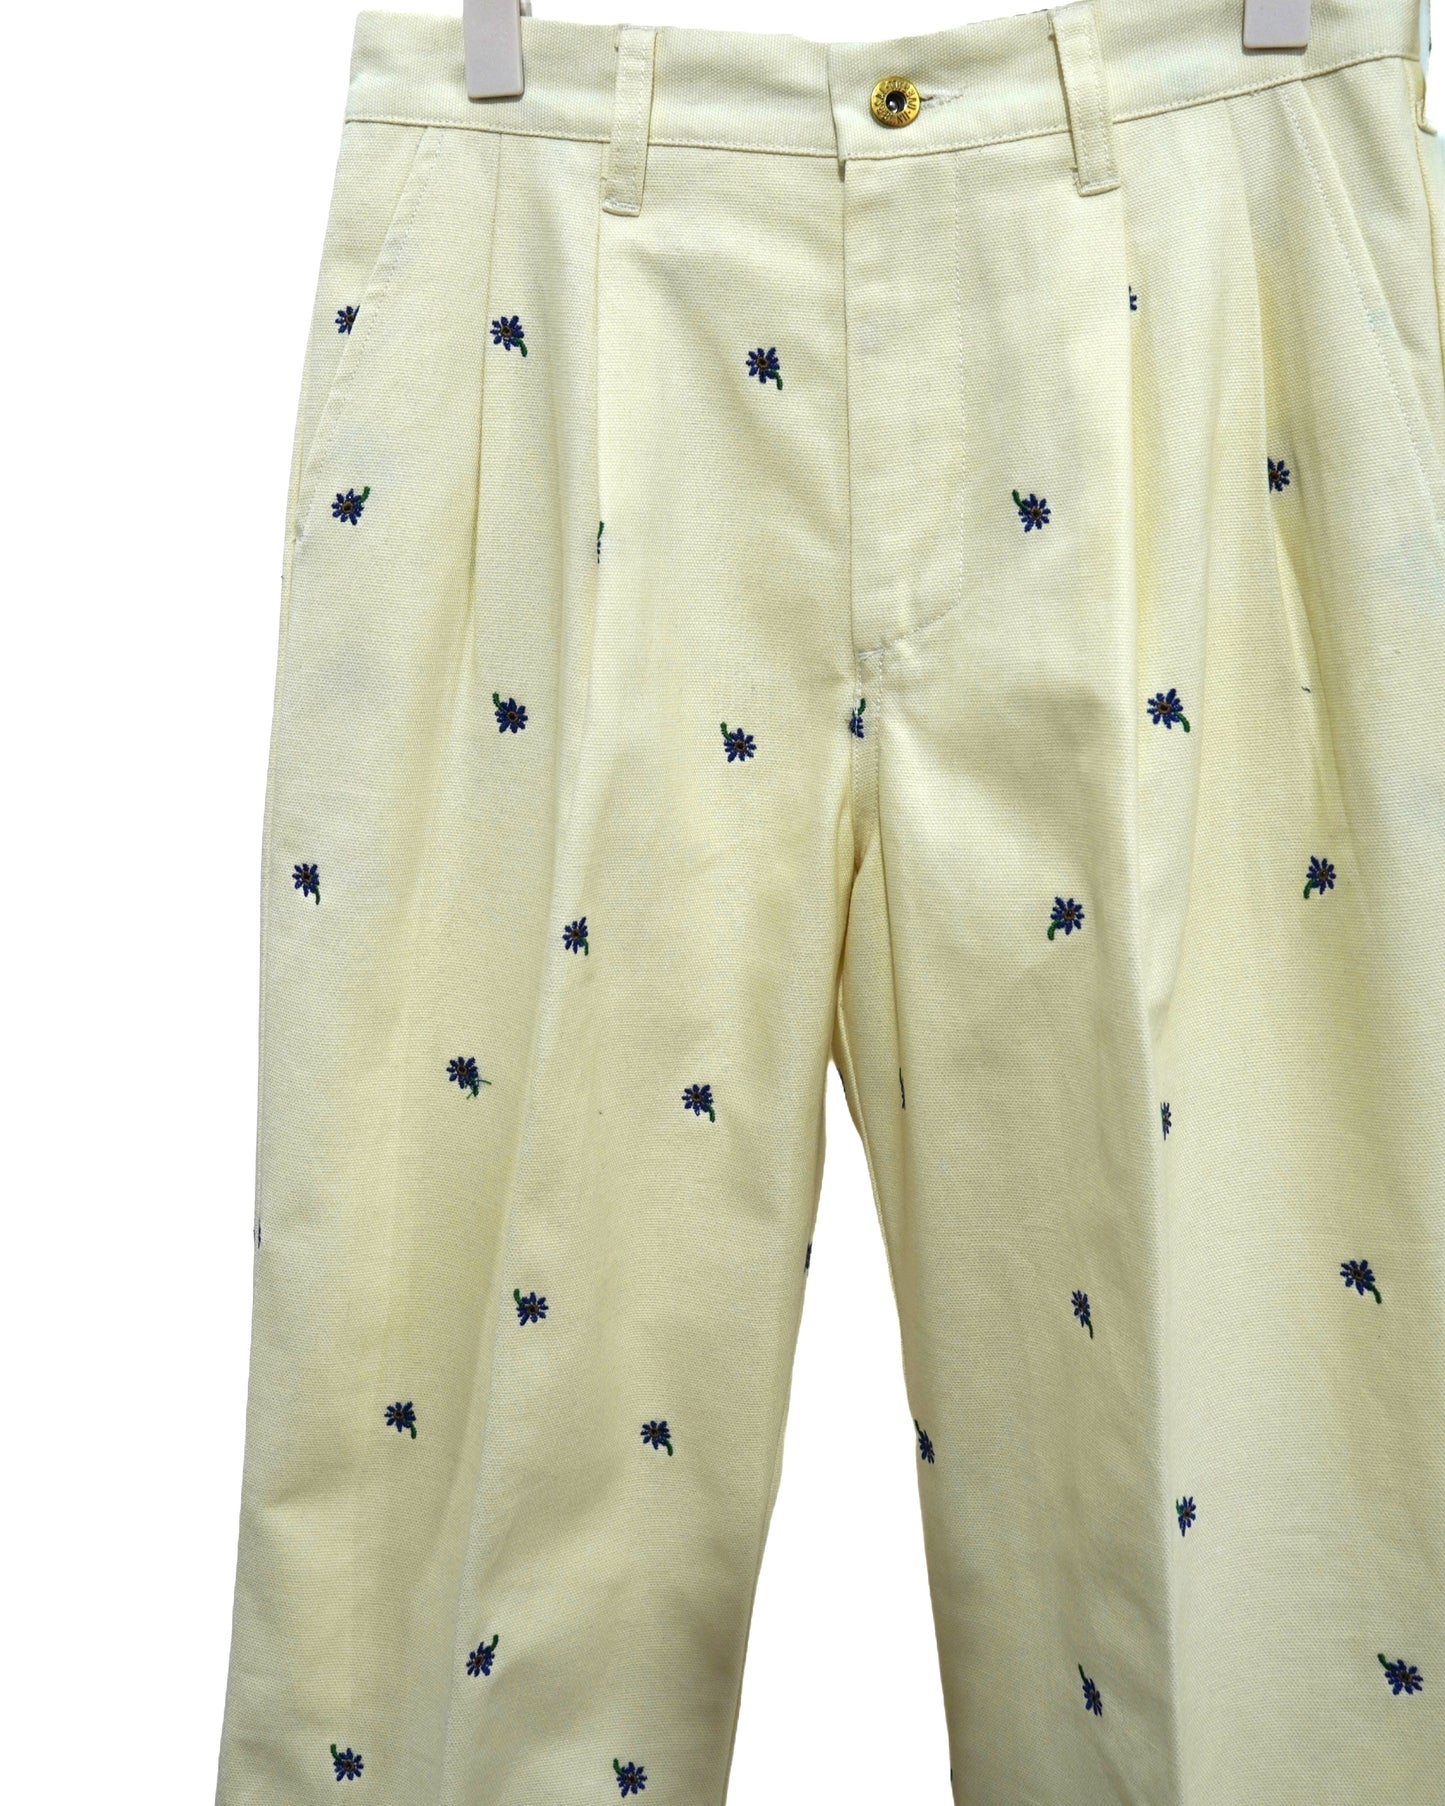 NON TOKYO / FLOWER EMBROIDERY TUCK PANTS feat.UNIVERSALOVERALL (WHITE) / 〈ノントーキョー〉フラワー刺繍タックパンツ (ホワイト)